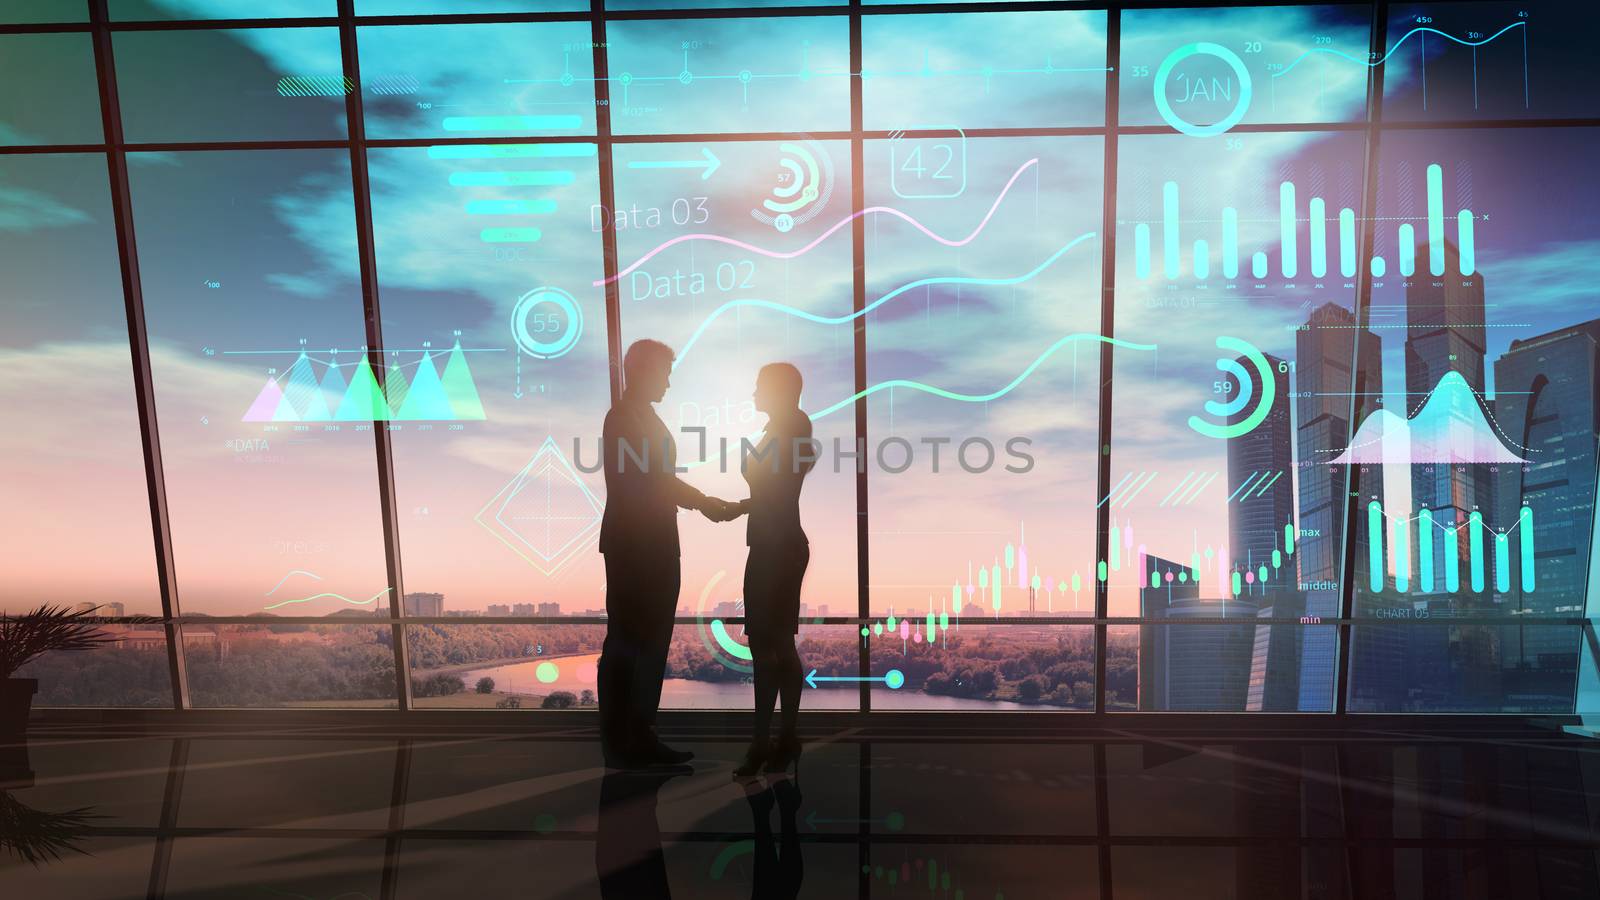 Silhouettes of man and woman shake hands while standing in their office opposite the infographic.